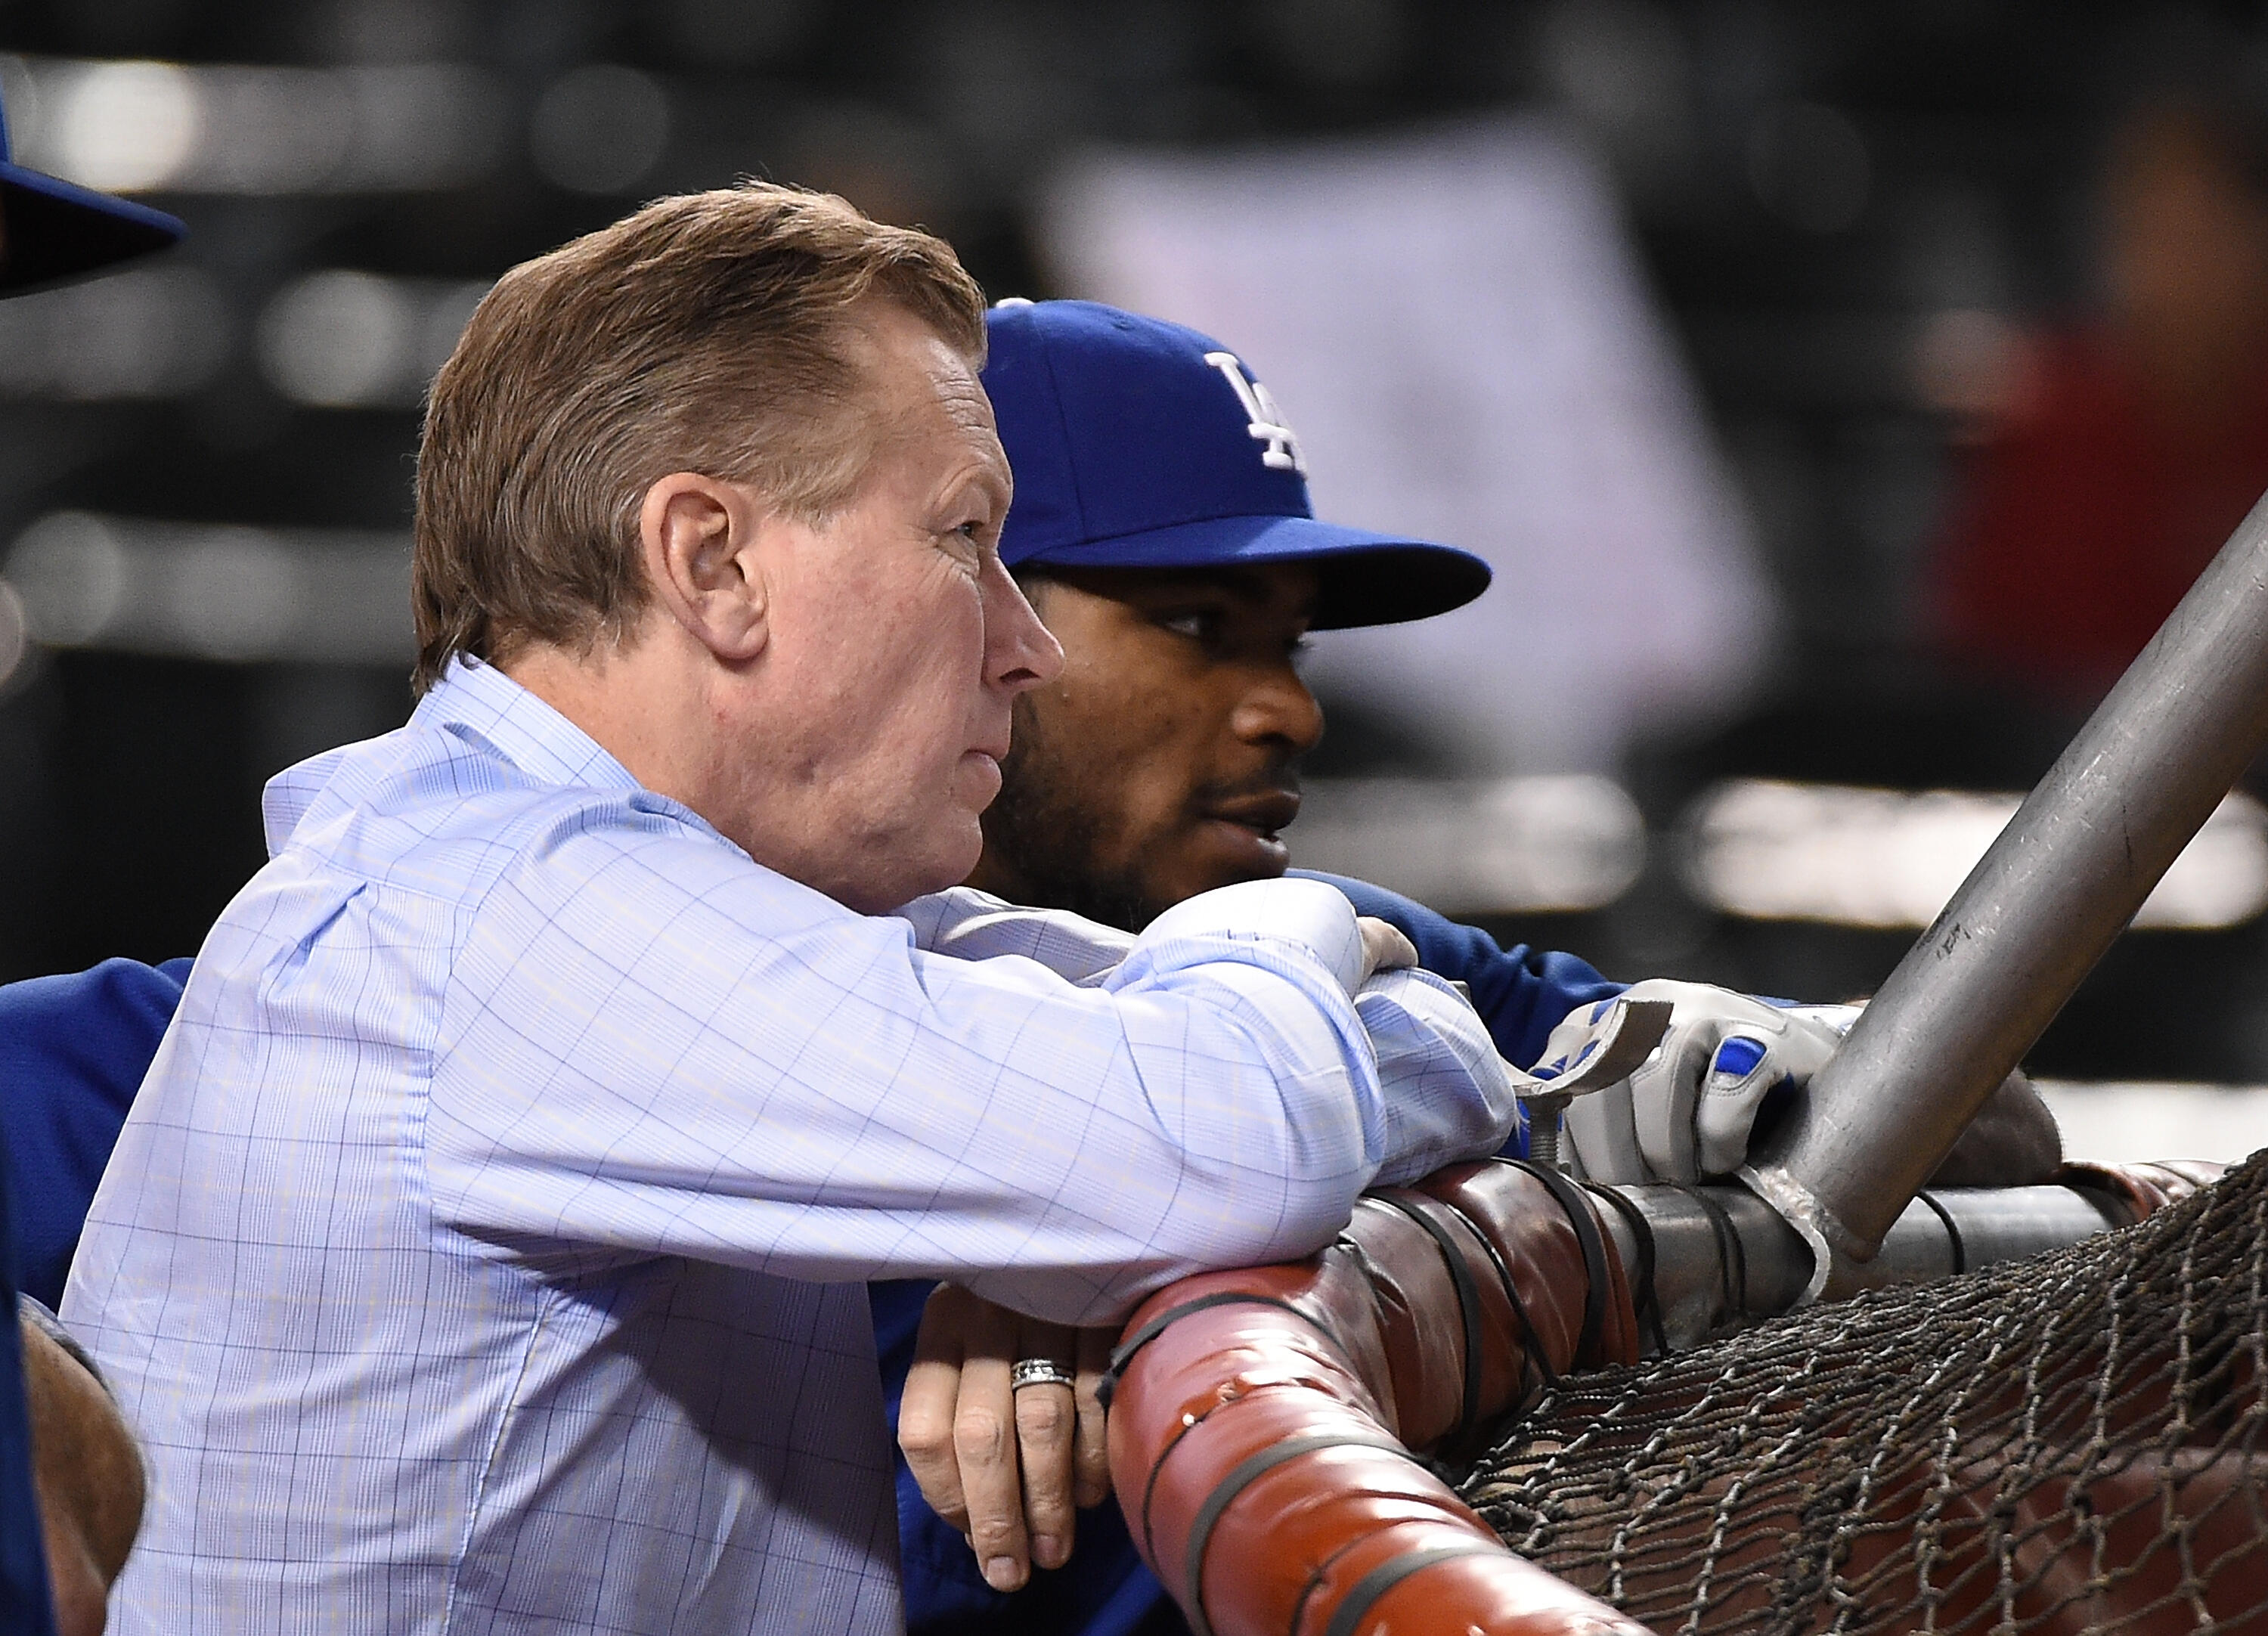 PHOENIX, AZ - APRIL 22:  Former Dodgers player Orel Hershiser talks with Yasiel Puig #66 of the Los Angeles Dodgers during batting practice prior to a game against the Arizona Diamondbacks at Chase Field on April 22, 2017 in Phoenix, Arizona.  (Photo by N